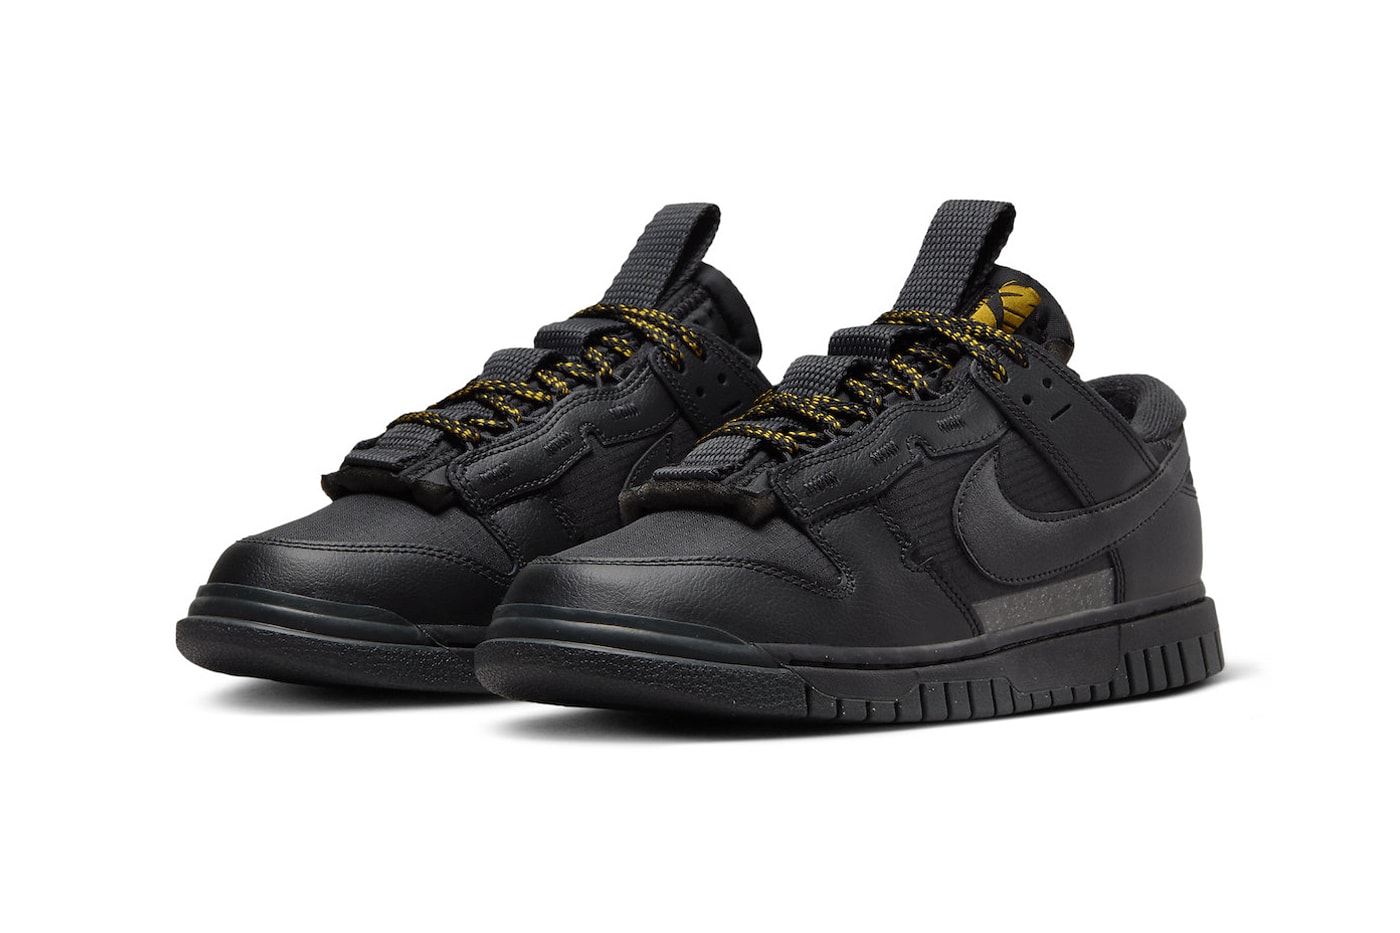 Nike Dunk Low Remastered Appears in Black and Gold FB8894-001 Black/Black-Metallic Gold low top skater shoes holiday 2023 swoosh